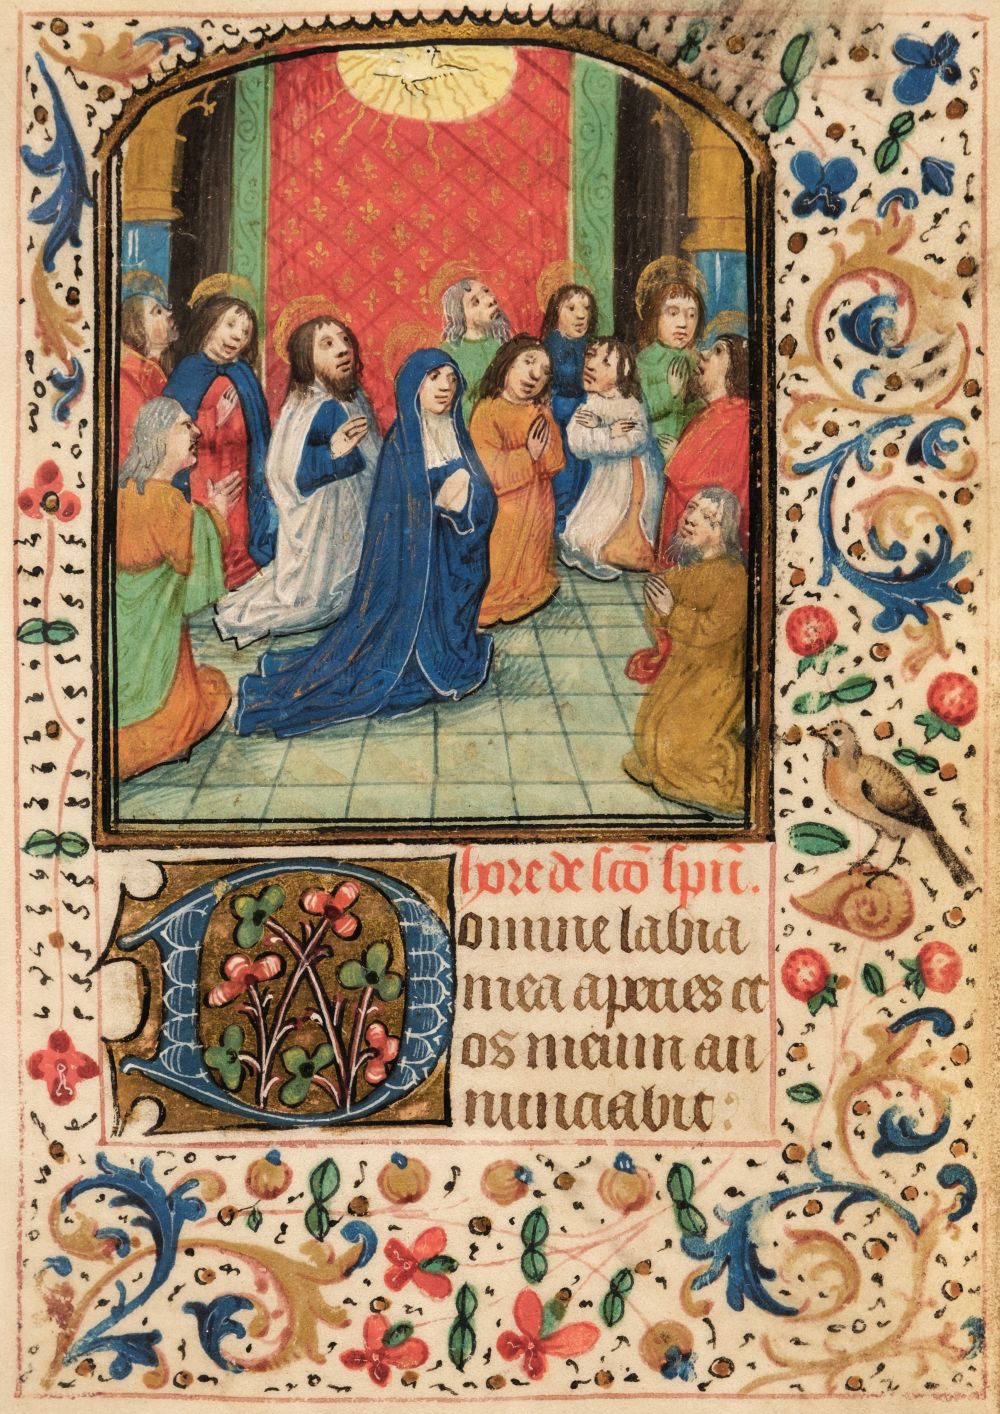 Book of Hours. Illuminated manuscript on vellum, [probably French-Flanders, circa 1500] - Image 3 of 3